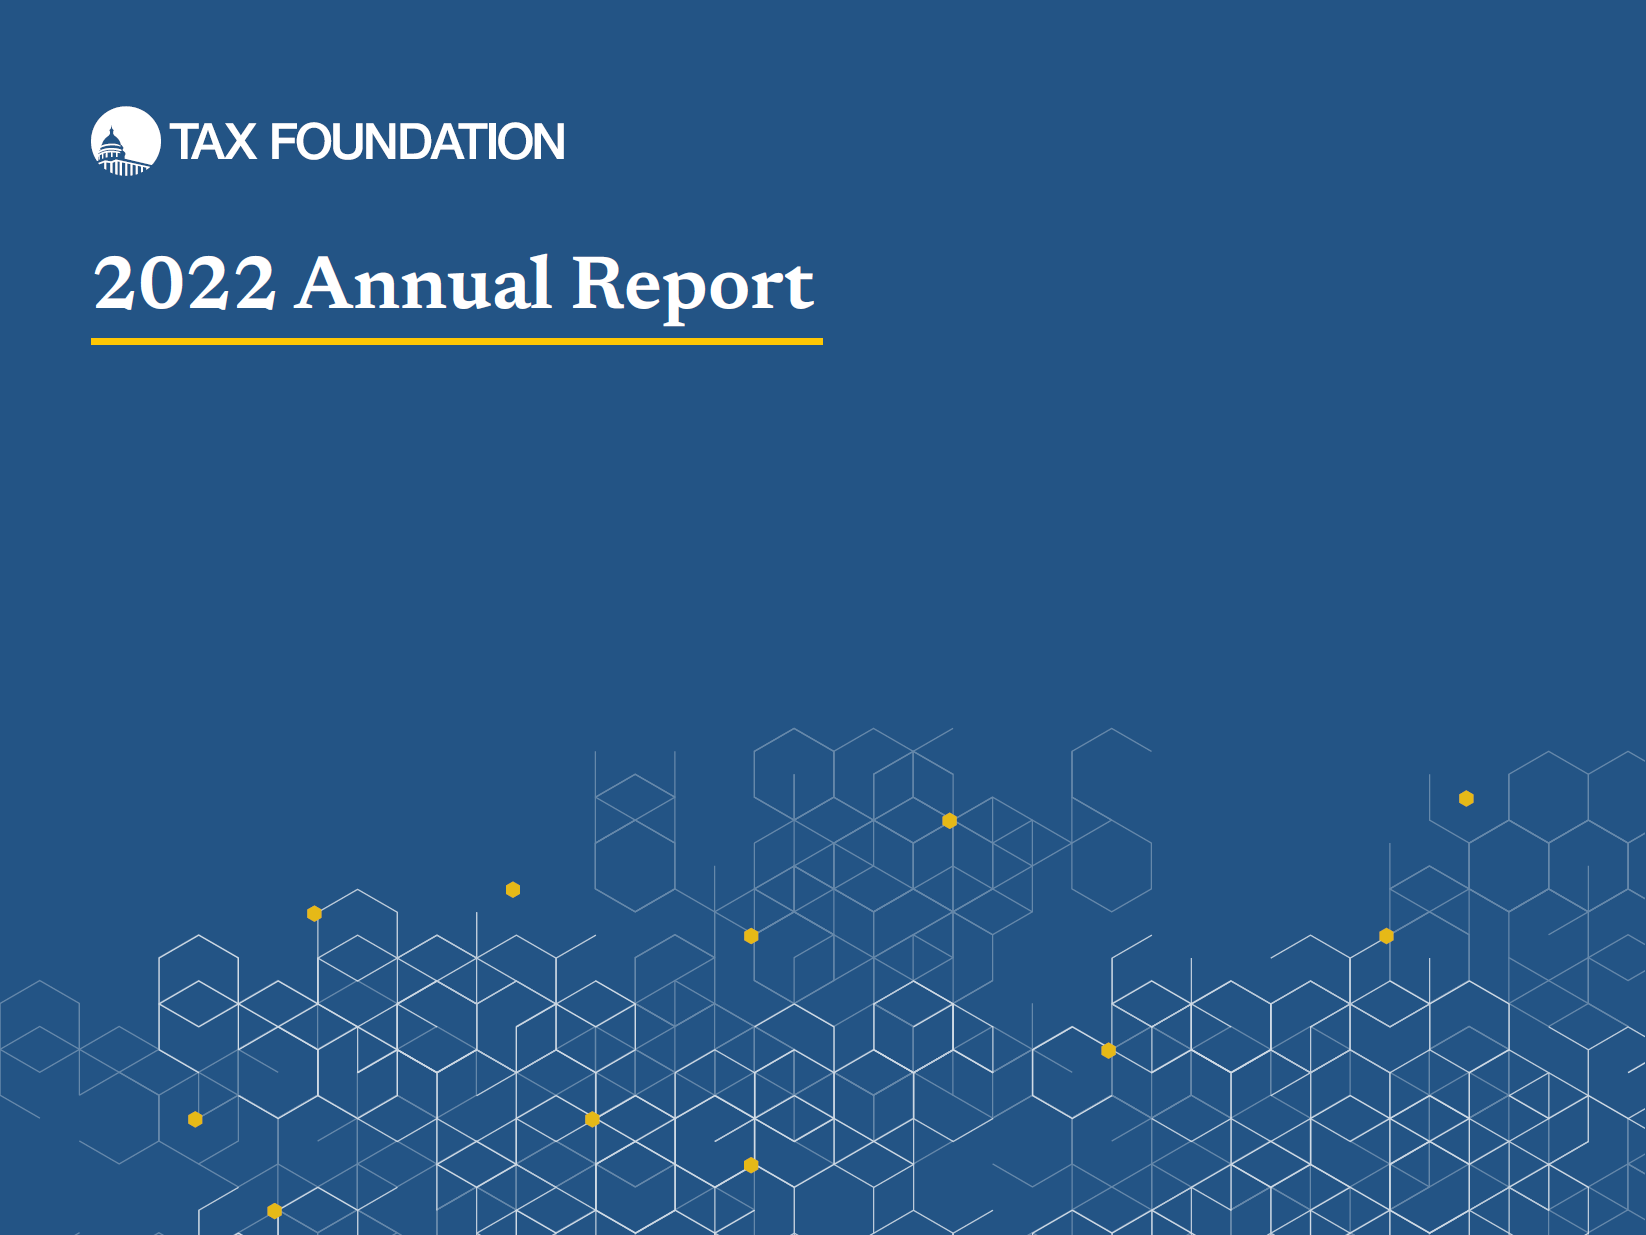 Tax Foundation Annual Report 2022